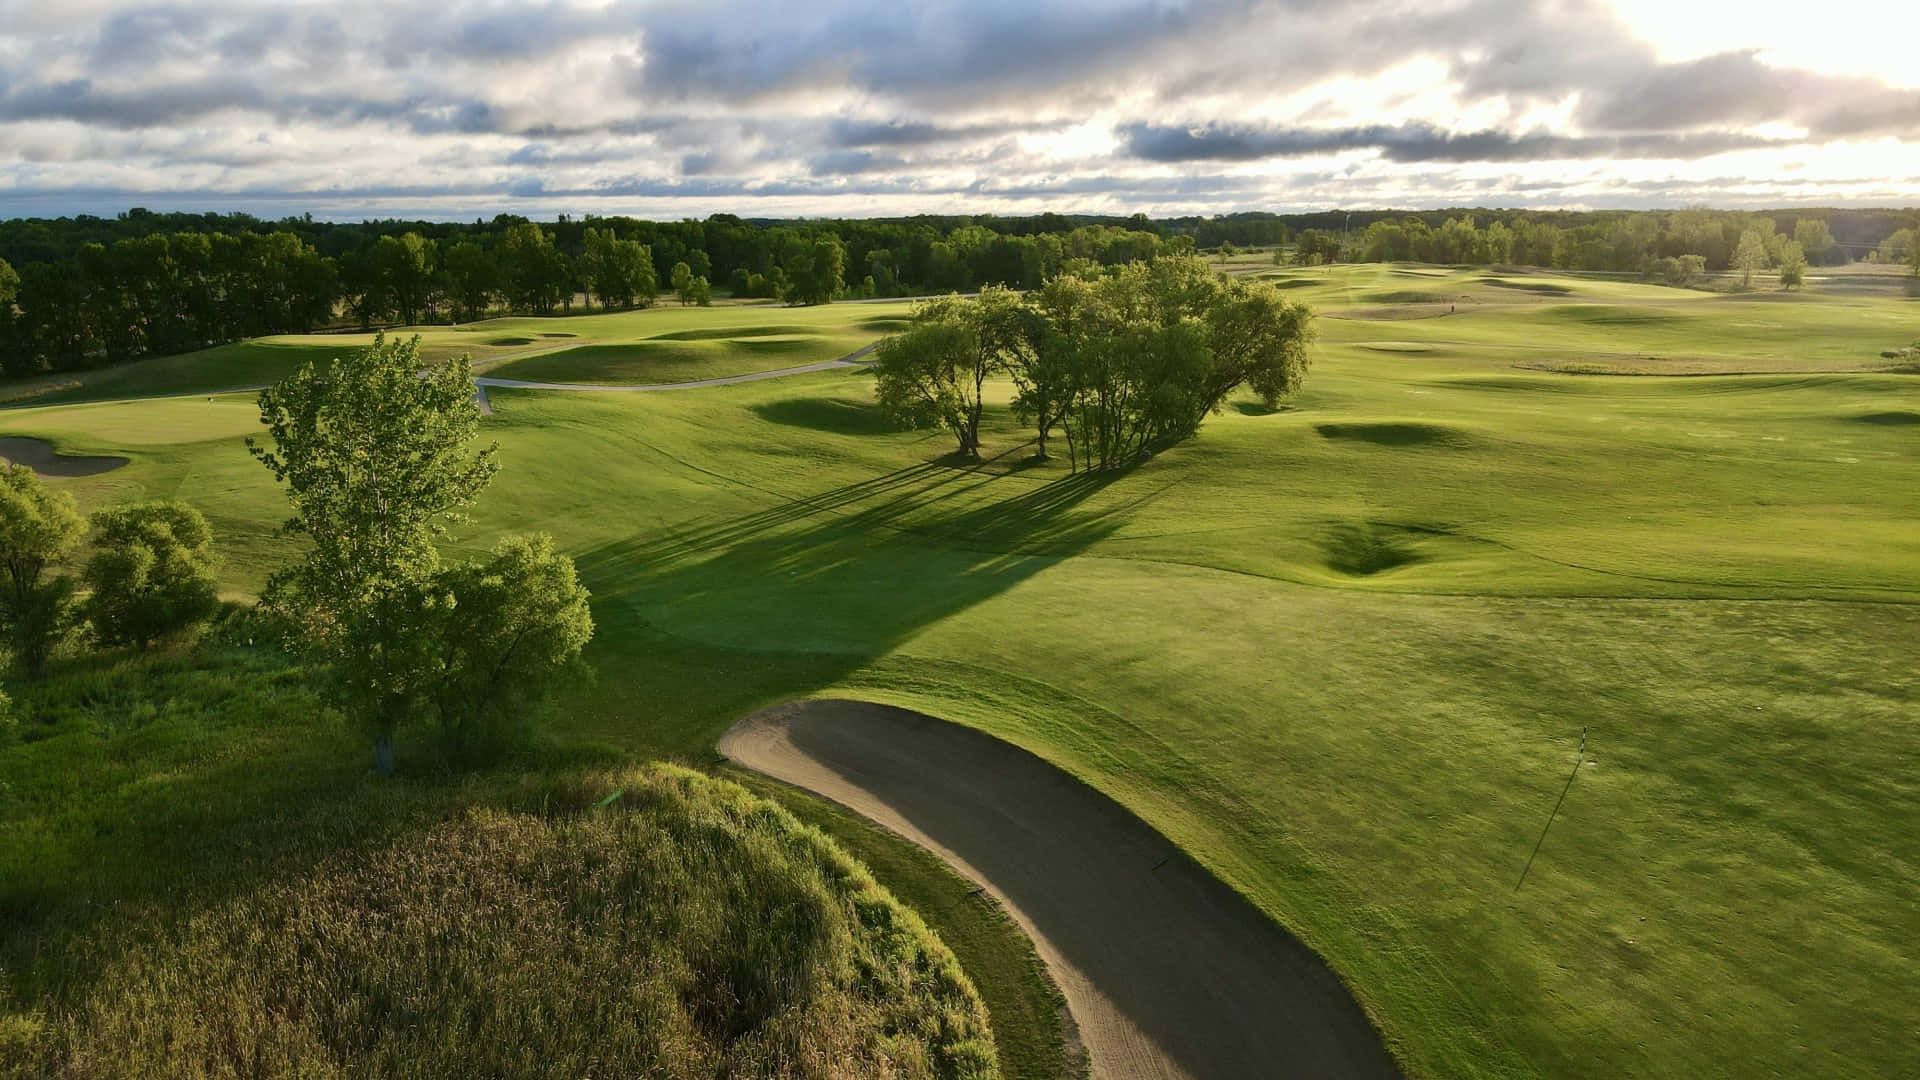 Enjoy the Scenic Views at Our Golf Course